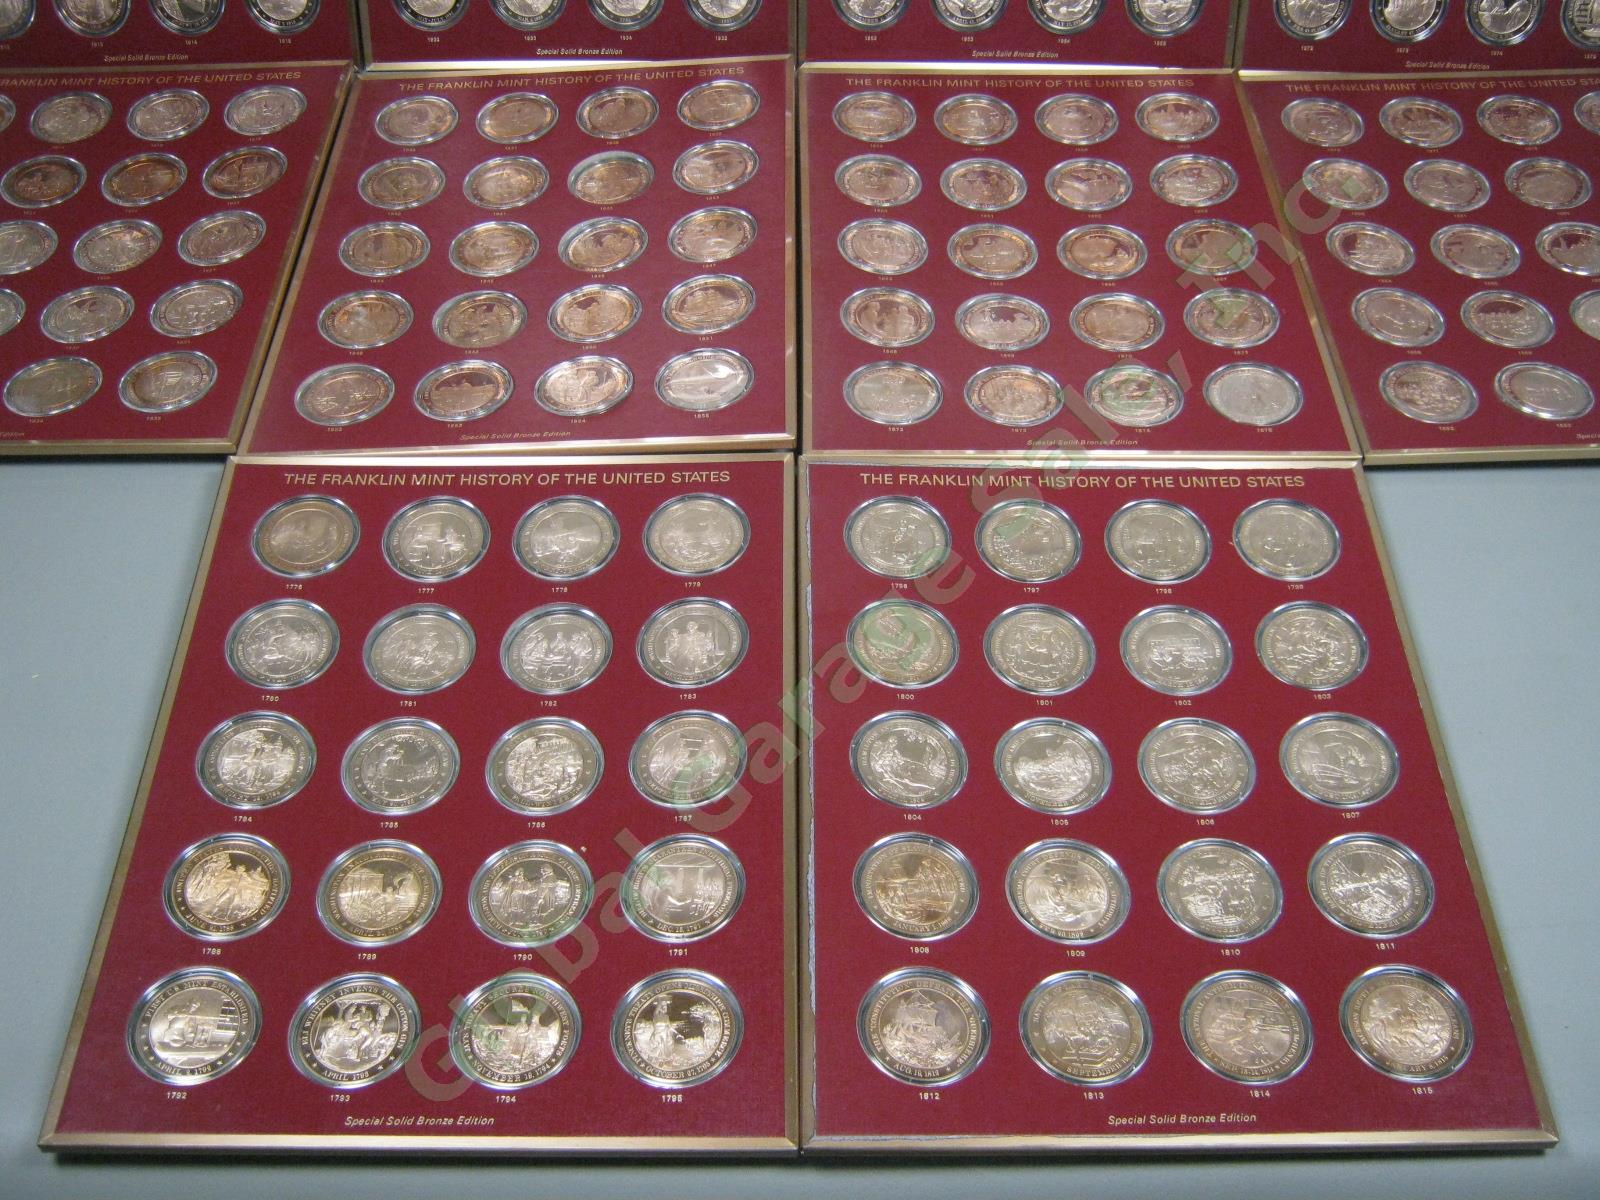 202 Franklin Mint 1776-1975 History Of The United State Solid Bronze Medal Coins 2